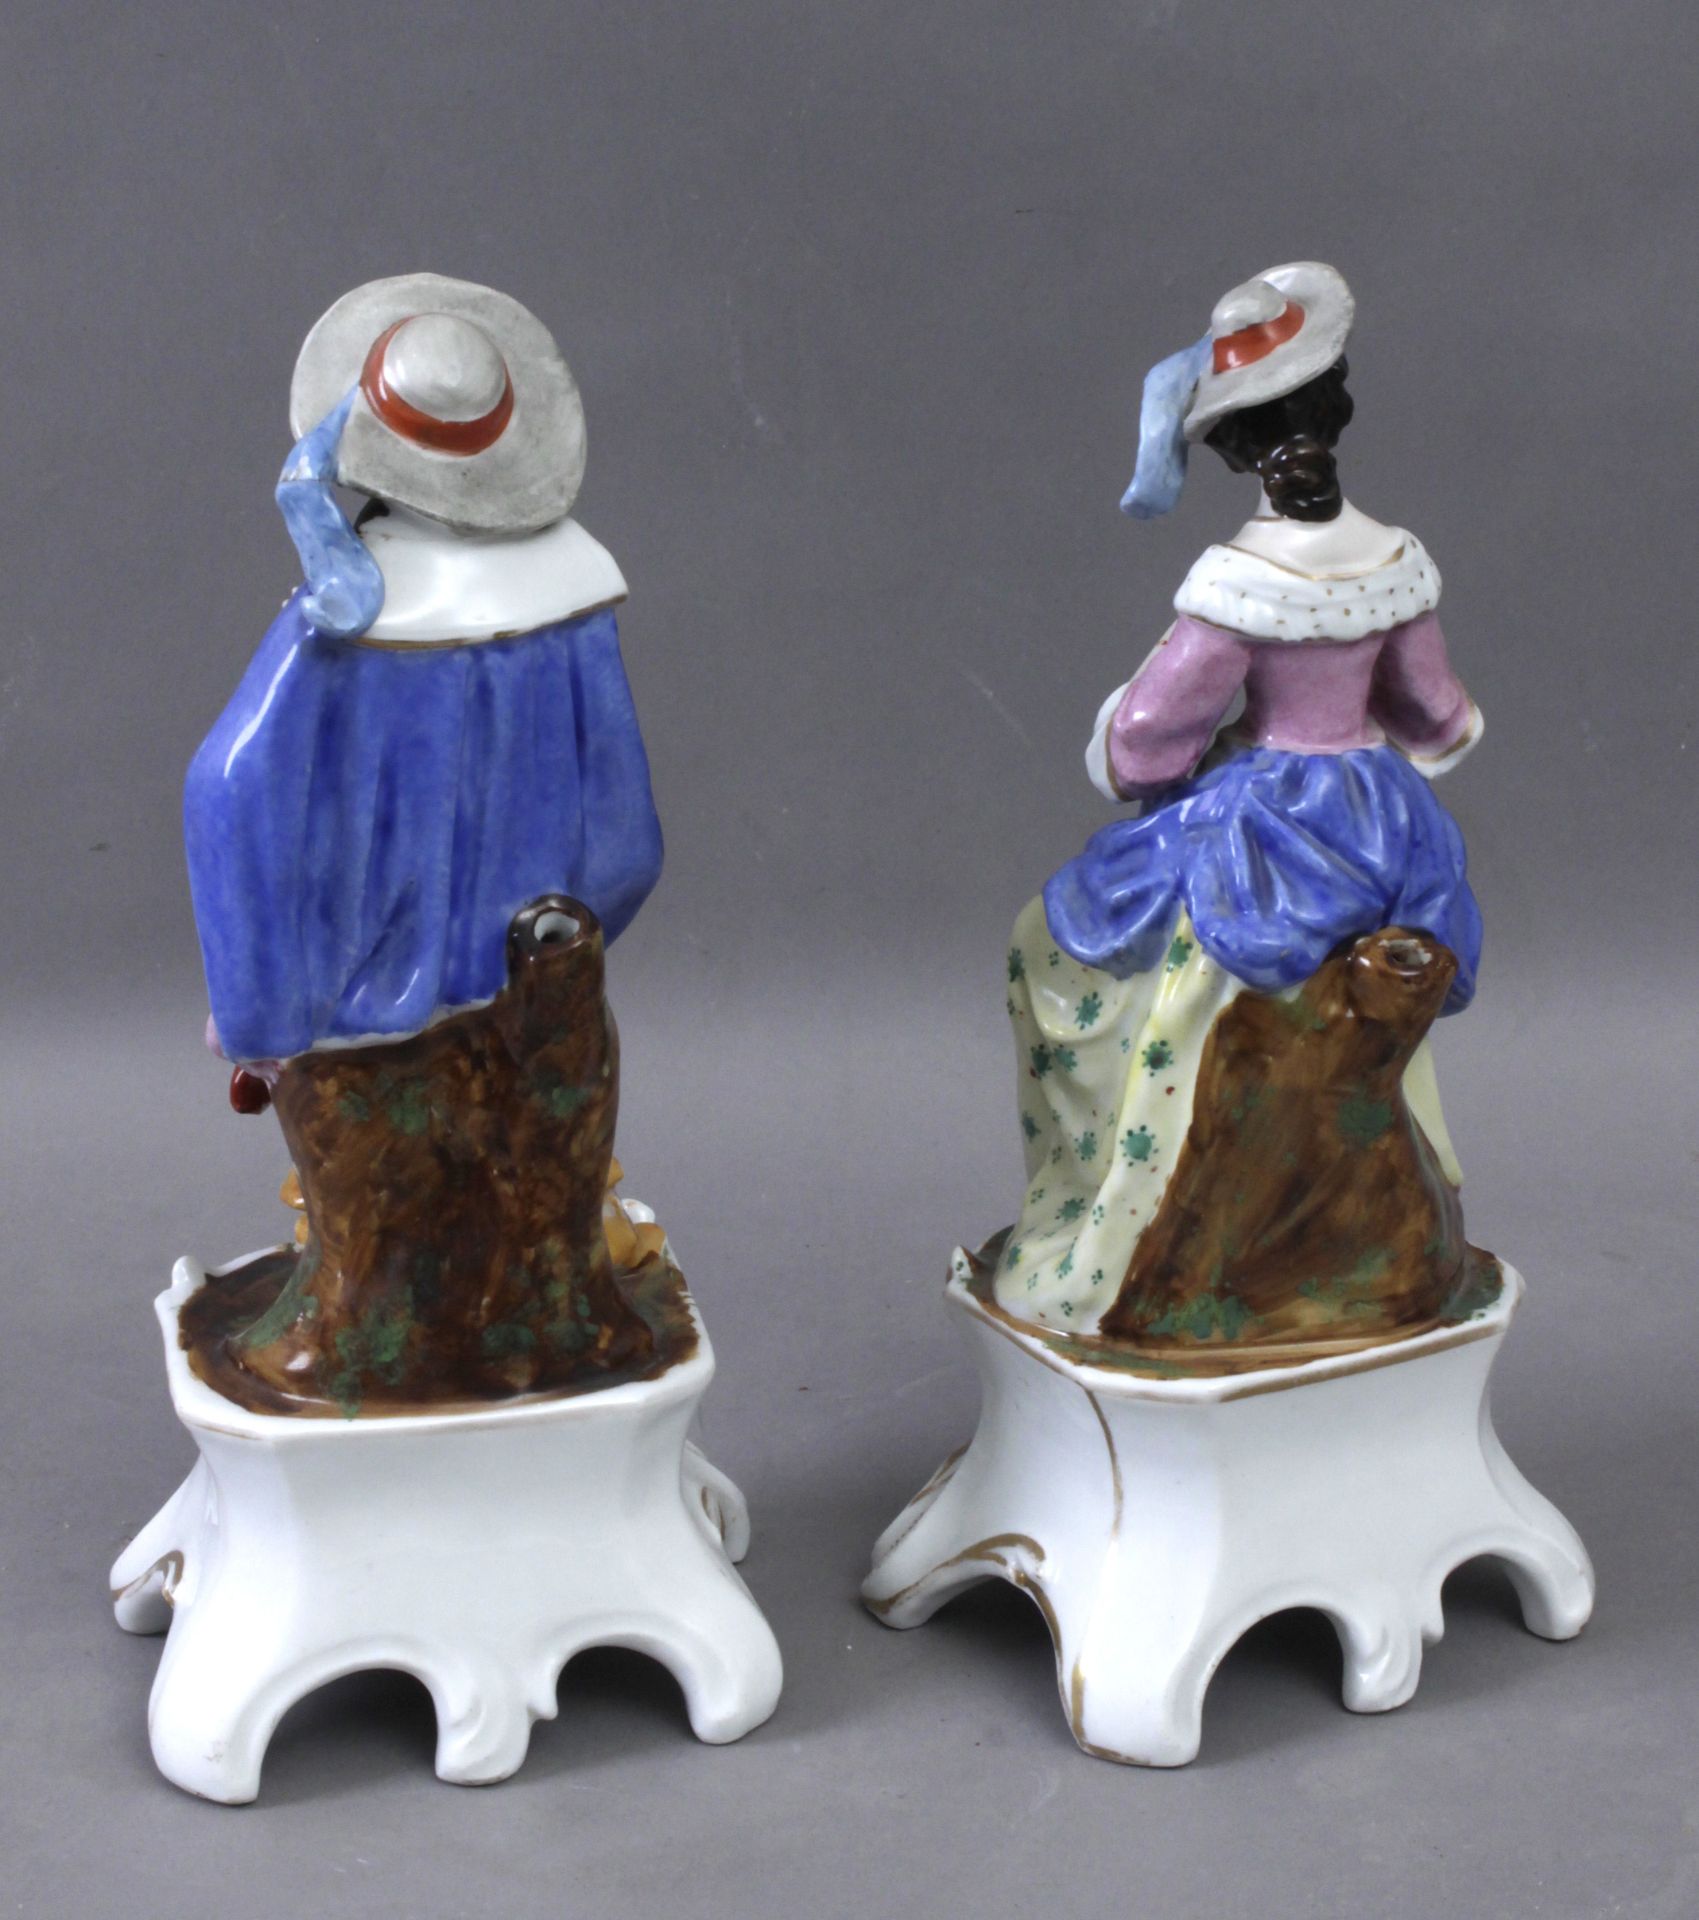 A pair of 19th century figurines in Old Paris porcelain - Image 2 of 3